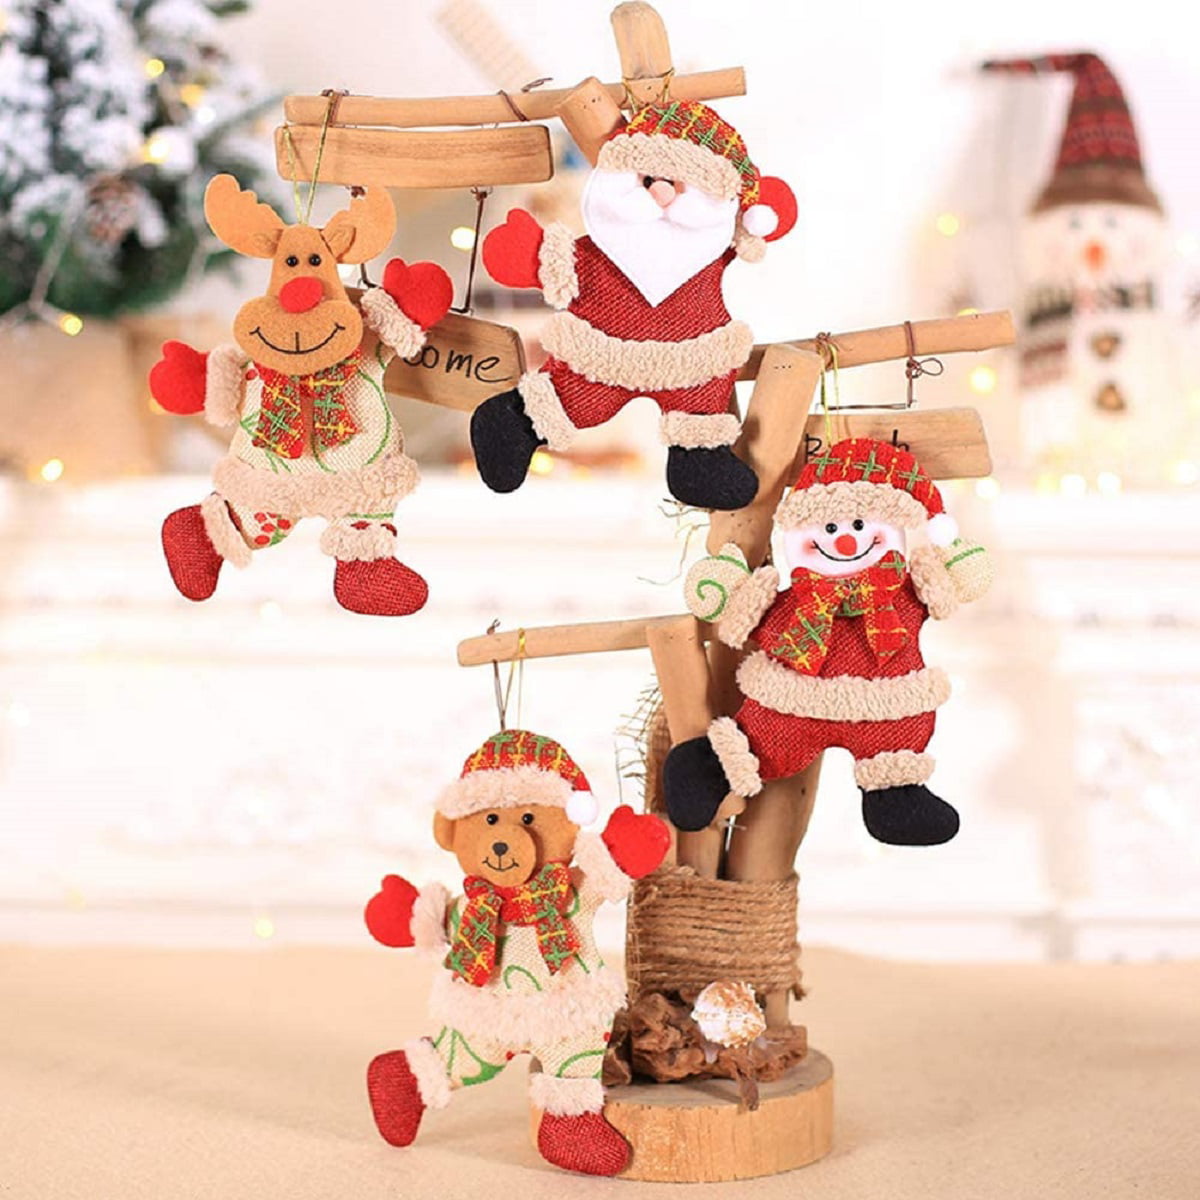 2021 Christmas Decorations,4 Pack Xmas Tree Decorations Christmas Ornaments Gift Santa Claus Snowman Tree Toy Doll Hang Decor Merry Christmas Decorative Pendants Party Decor Gifts Home Bedroom 4pc